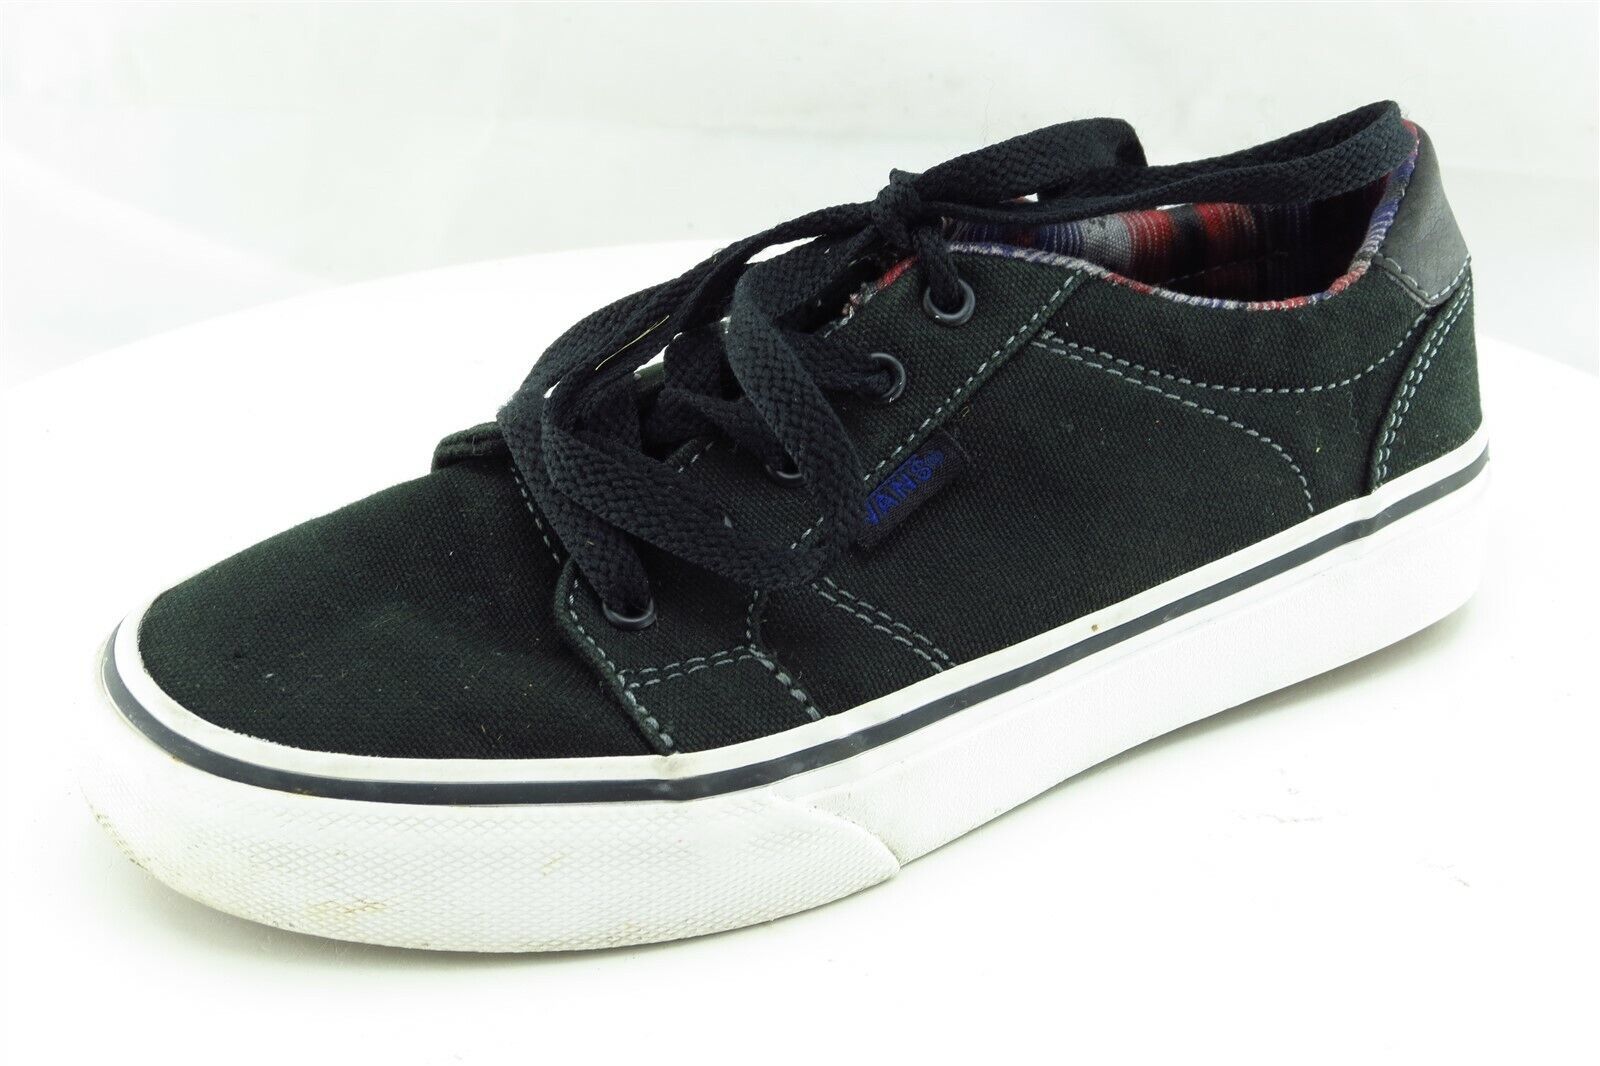 Primary image for VANS Youth Boys Shoes Sz 2 M Black Fabric Skateboarding